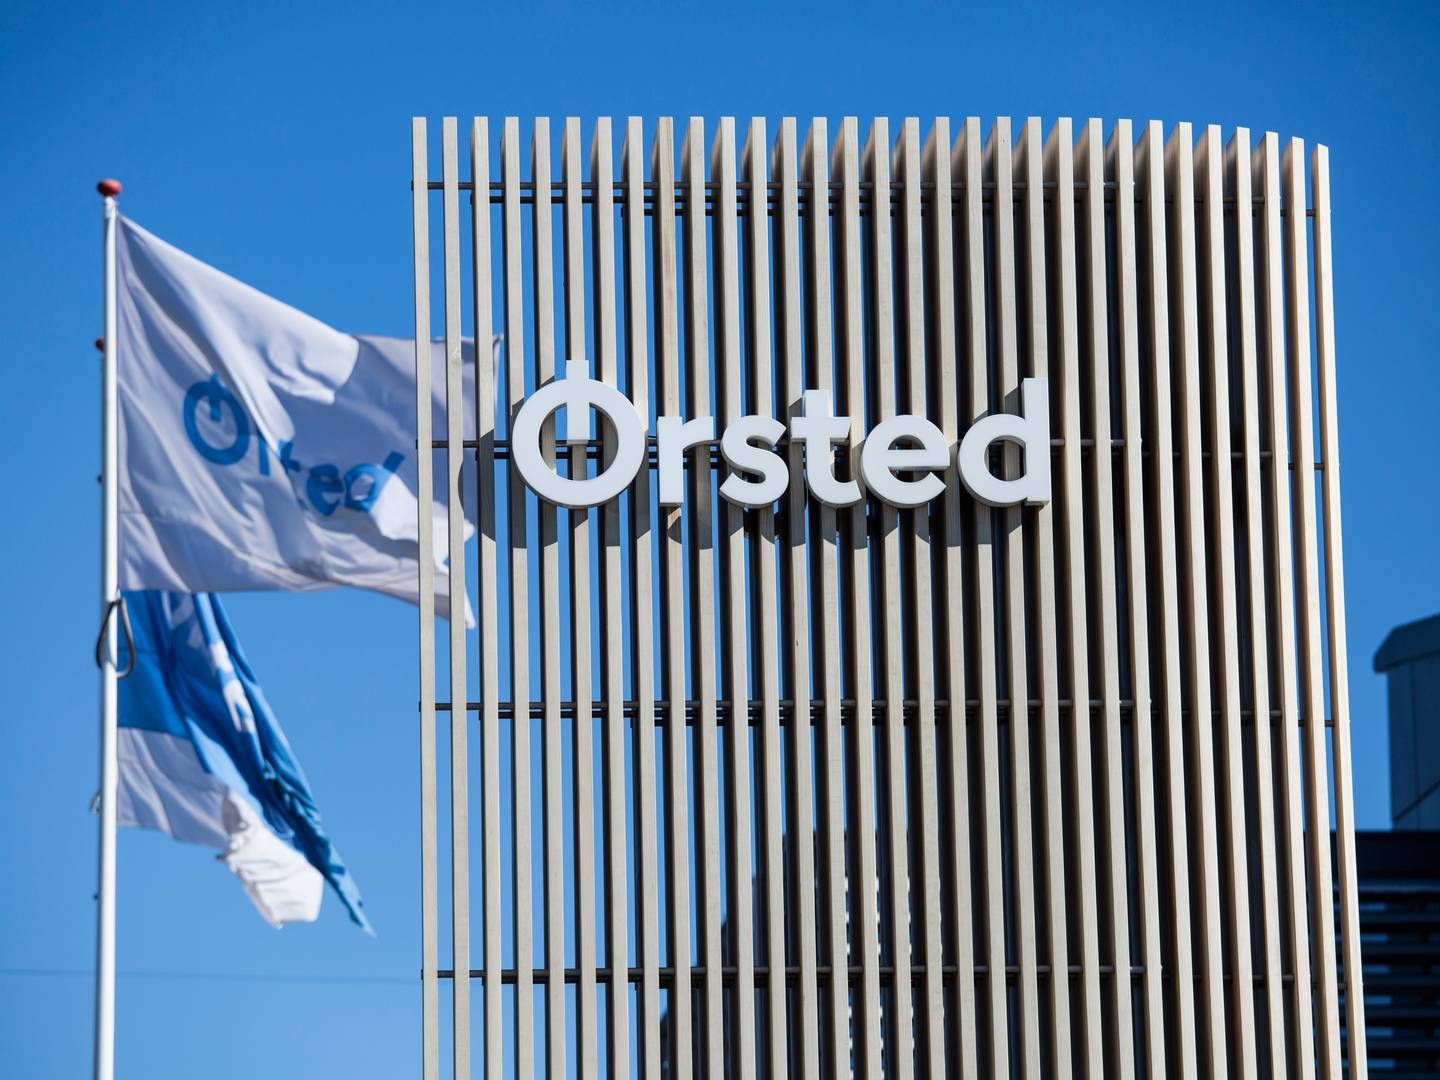 The Danish energy company expects to collect advantaging tax credits in the US in the future. | Photo: Ørsted